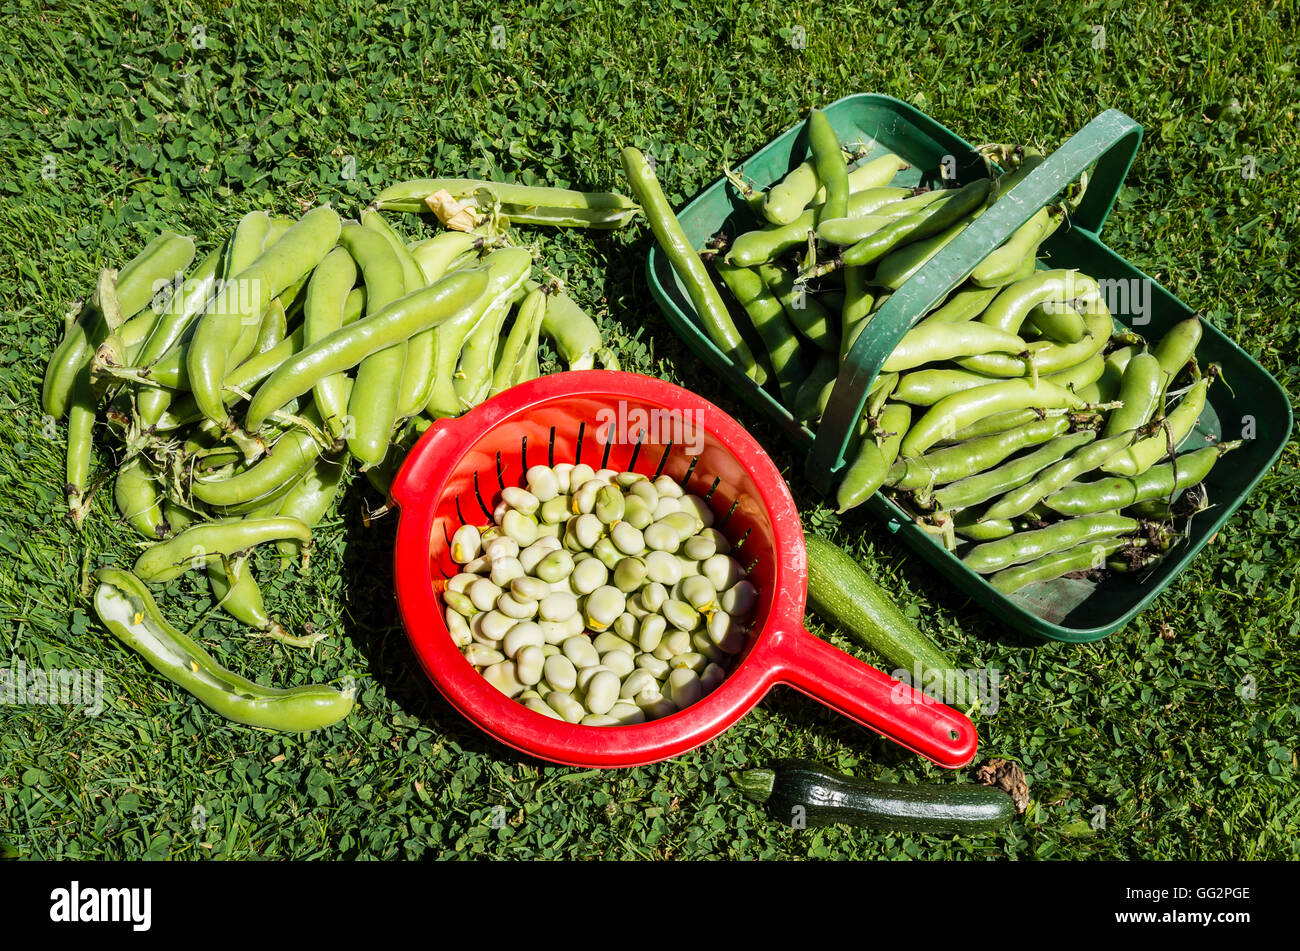 Freshly picked and podded broad beans ready for cooking and freezing Stock Photo